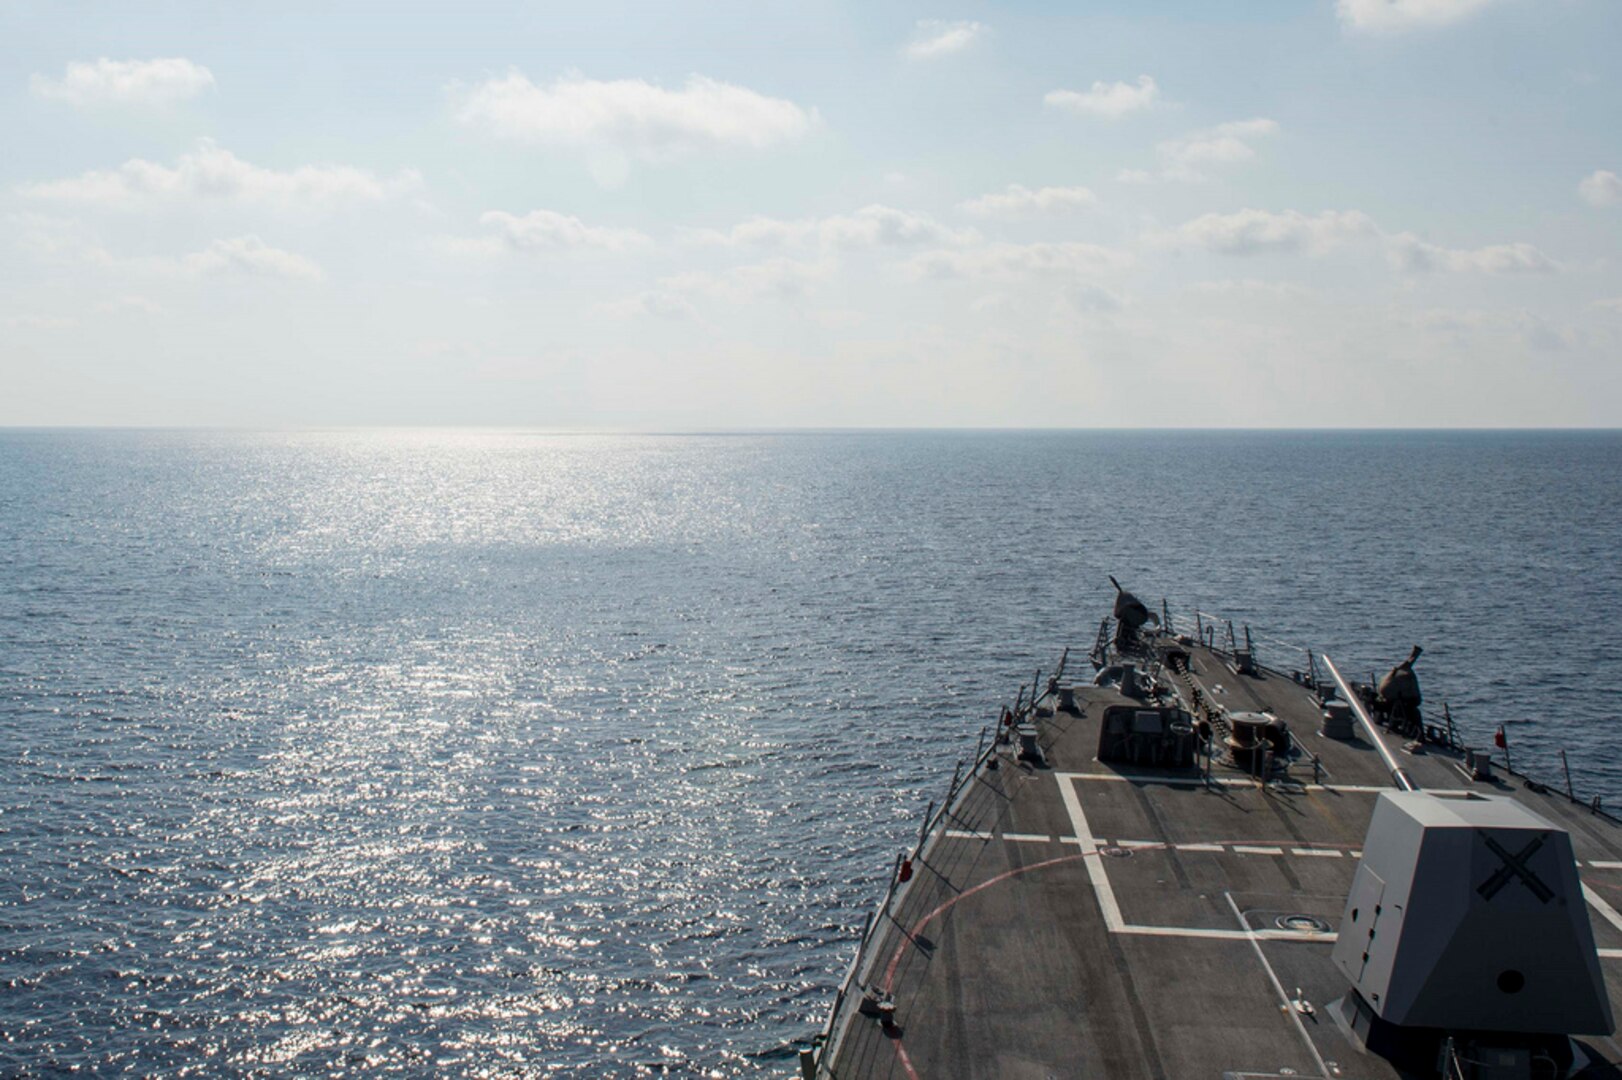 SOUTH CHINA SEA (May 2, 2016) The guided-missile destroyer USS William P. Lawrence (DDG 110) conducts a routine patrol in international waters while deployed in the U.S. 7th Fleet area of operations. 